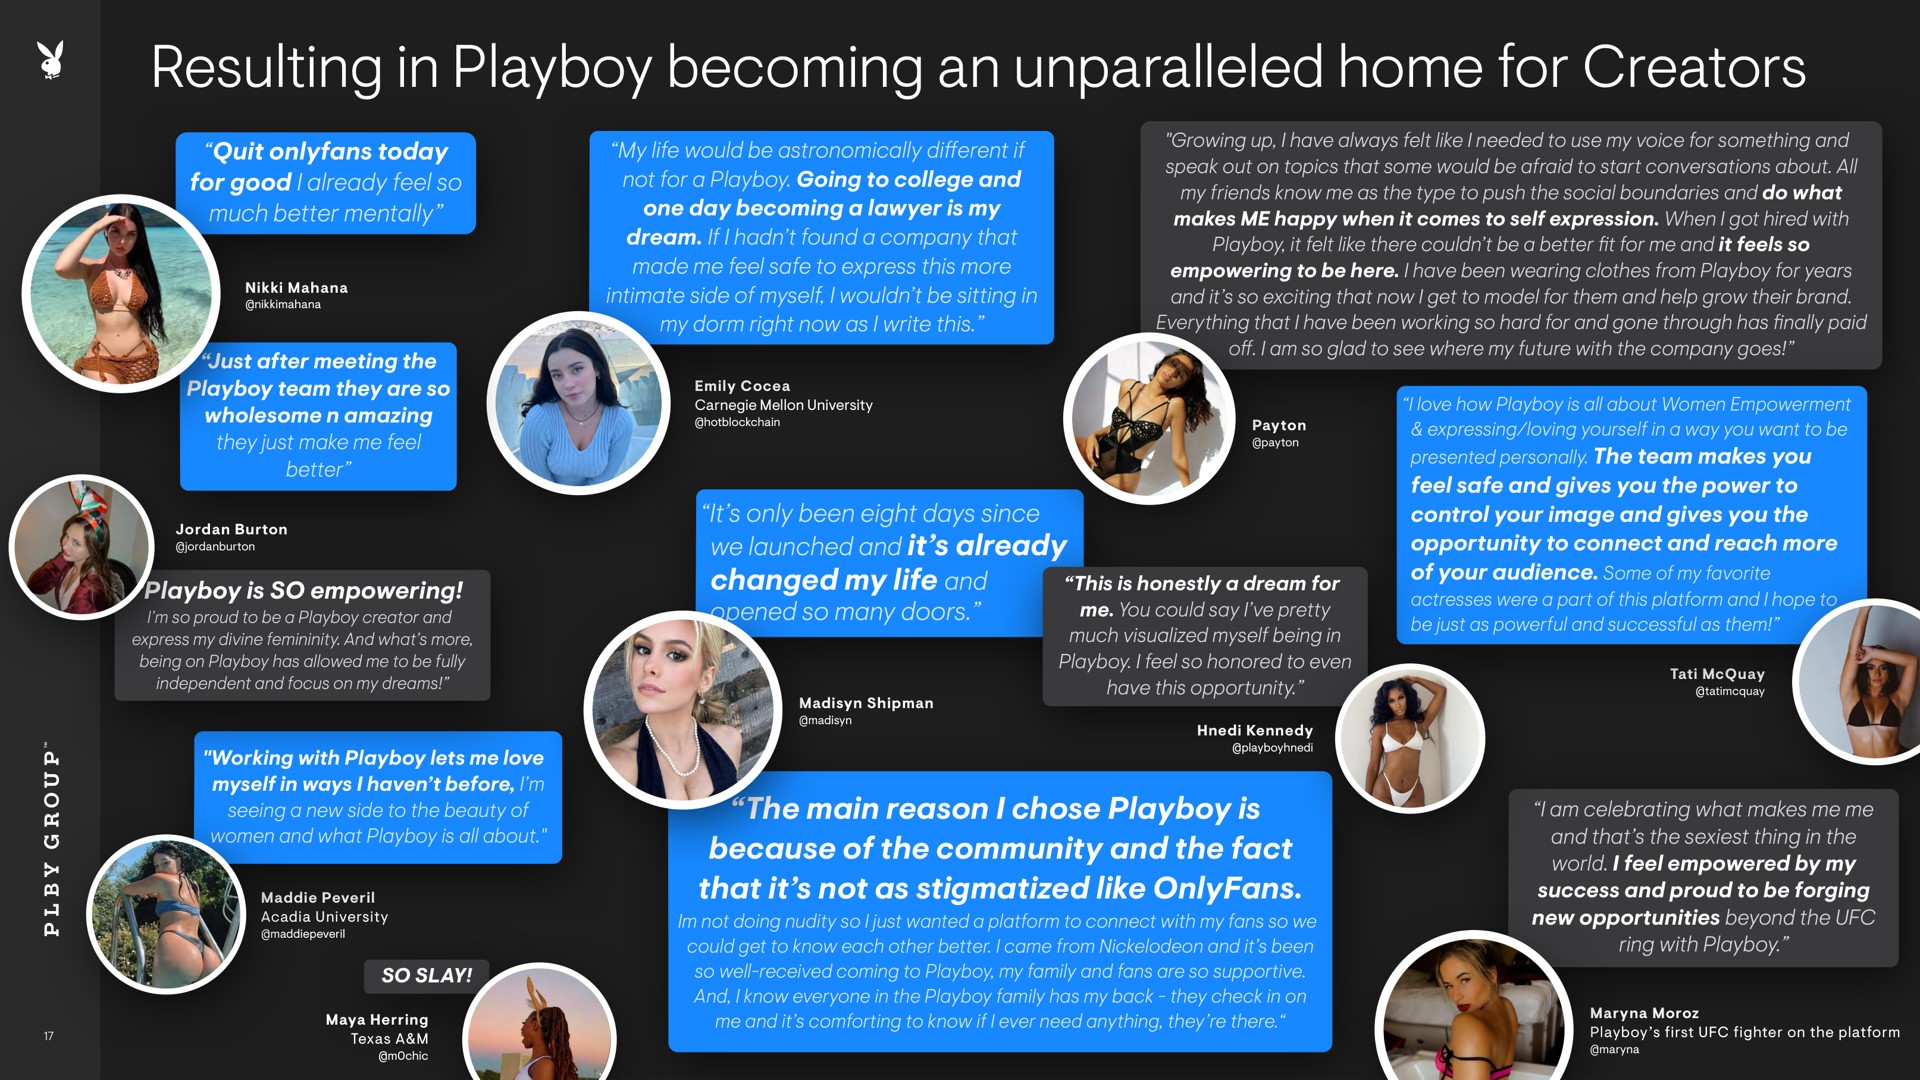 resulting in playboy becoming an unparalleled home for creators | Playboy